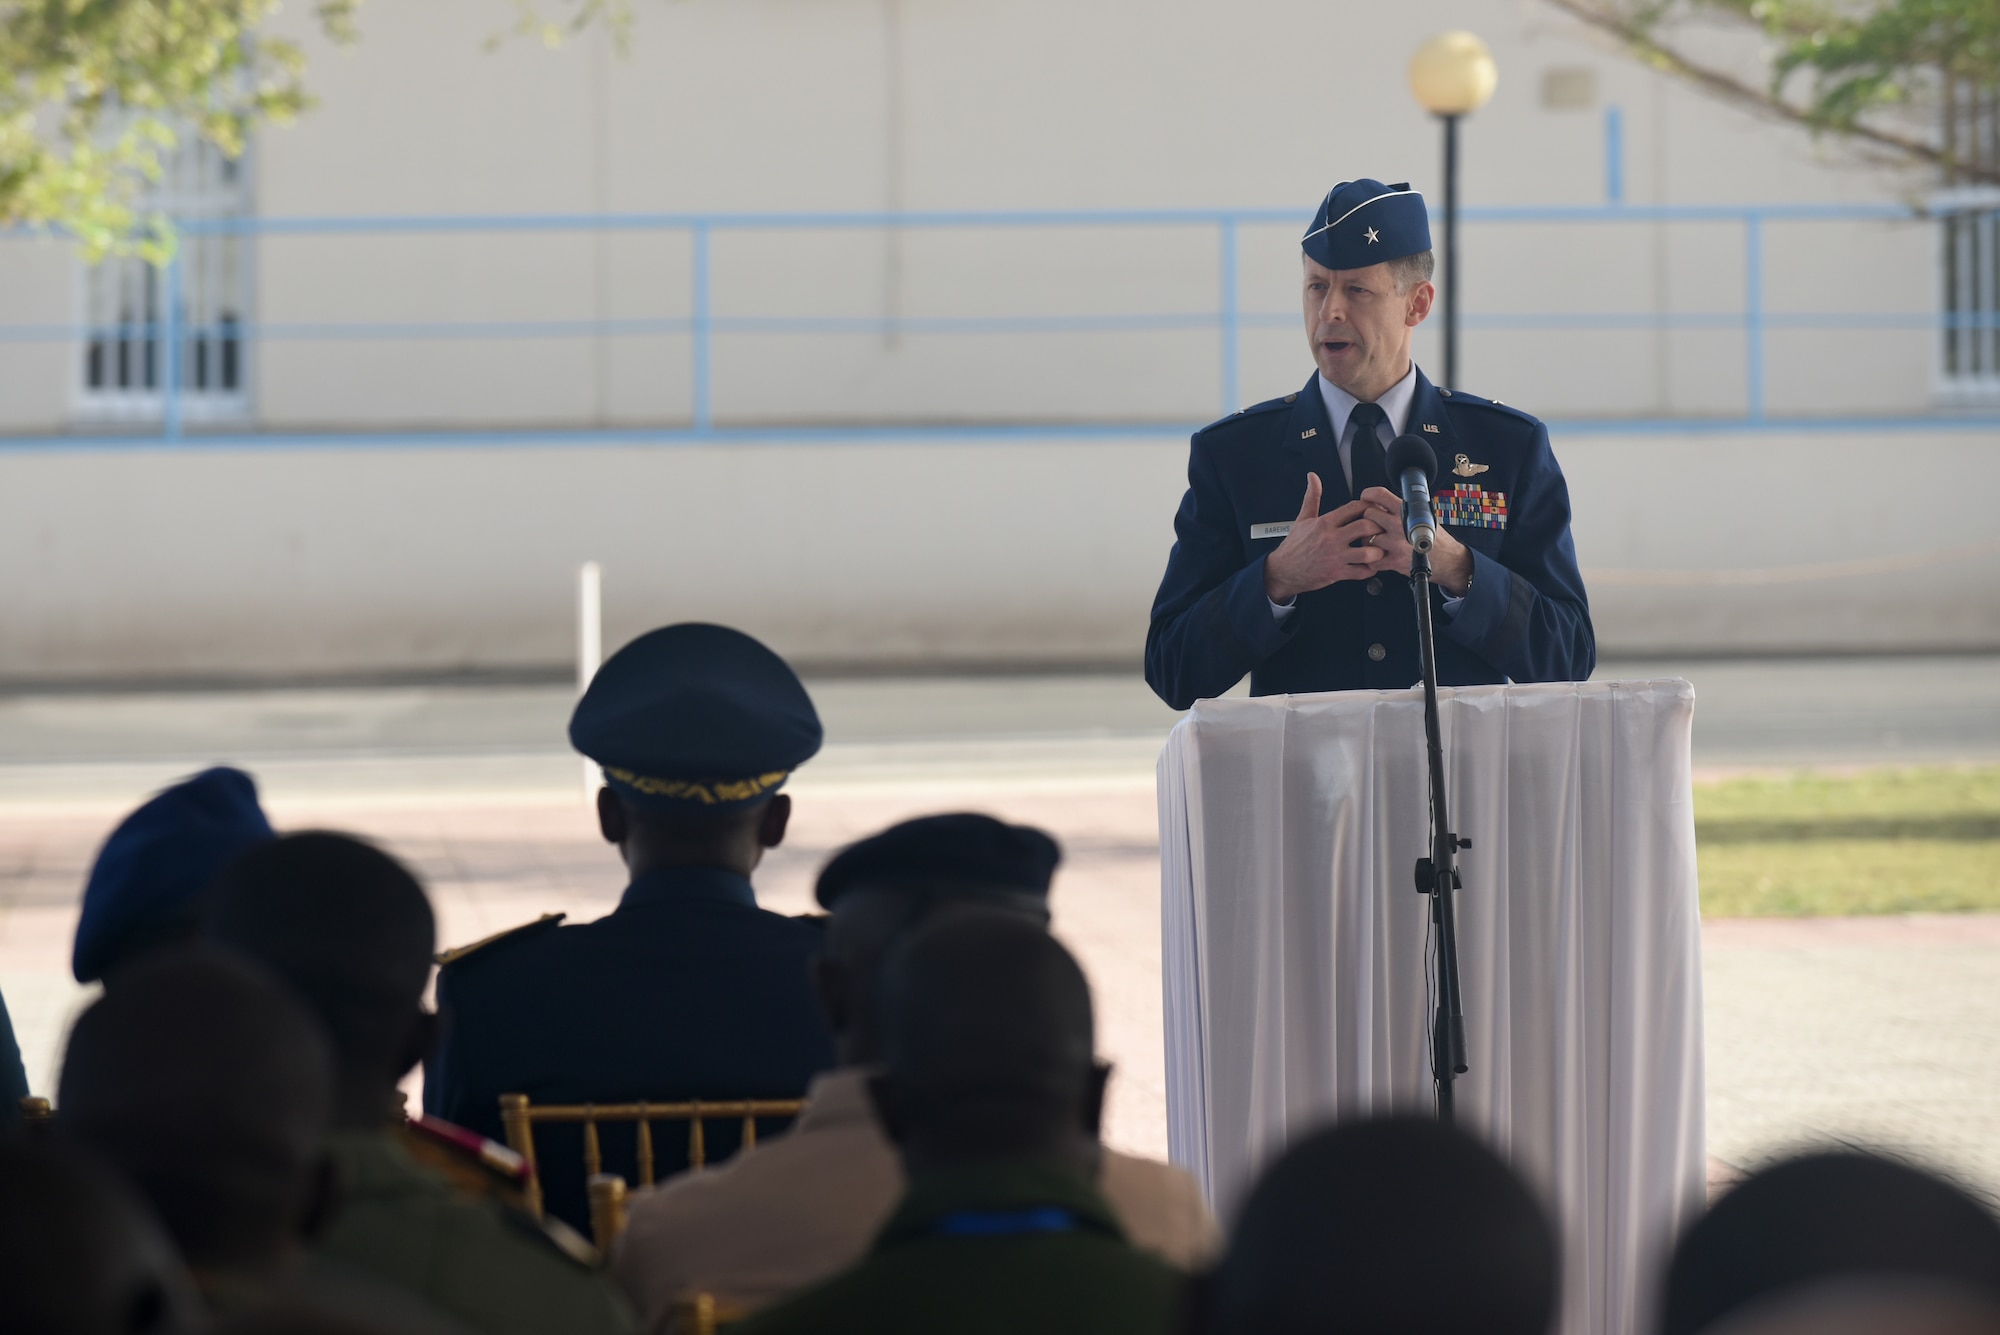 U.S. Air Force Brig. Gen. Dieter Bareihs, U.S. Air Forces in Africa director of plans, programs and analyses, speaks during the opening ceremony of African Partnership Flight Senegal at Captain Andalla Cissé Air Base, Senegal, March 19, 2018. The APF program is U.S. Air Forces in Africa’s premier security cooperation program with African partner nations to improve professional military aviation knowledge and skills. (U.S. Air Force photo by Airman 1st Class Eli Chevalier)